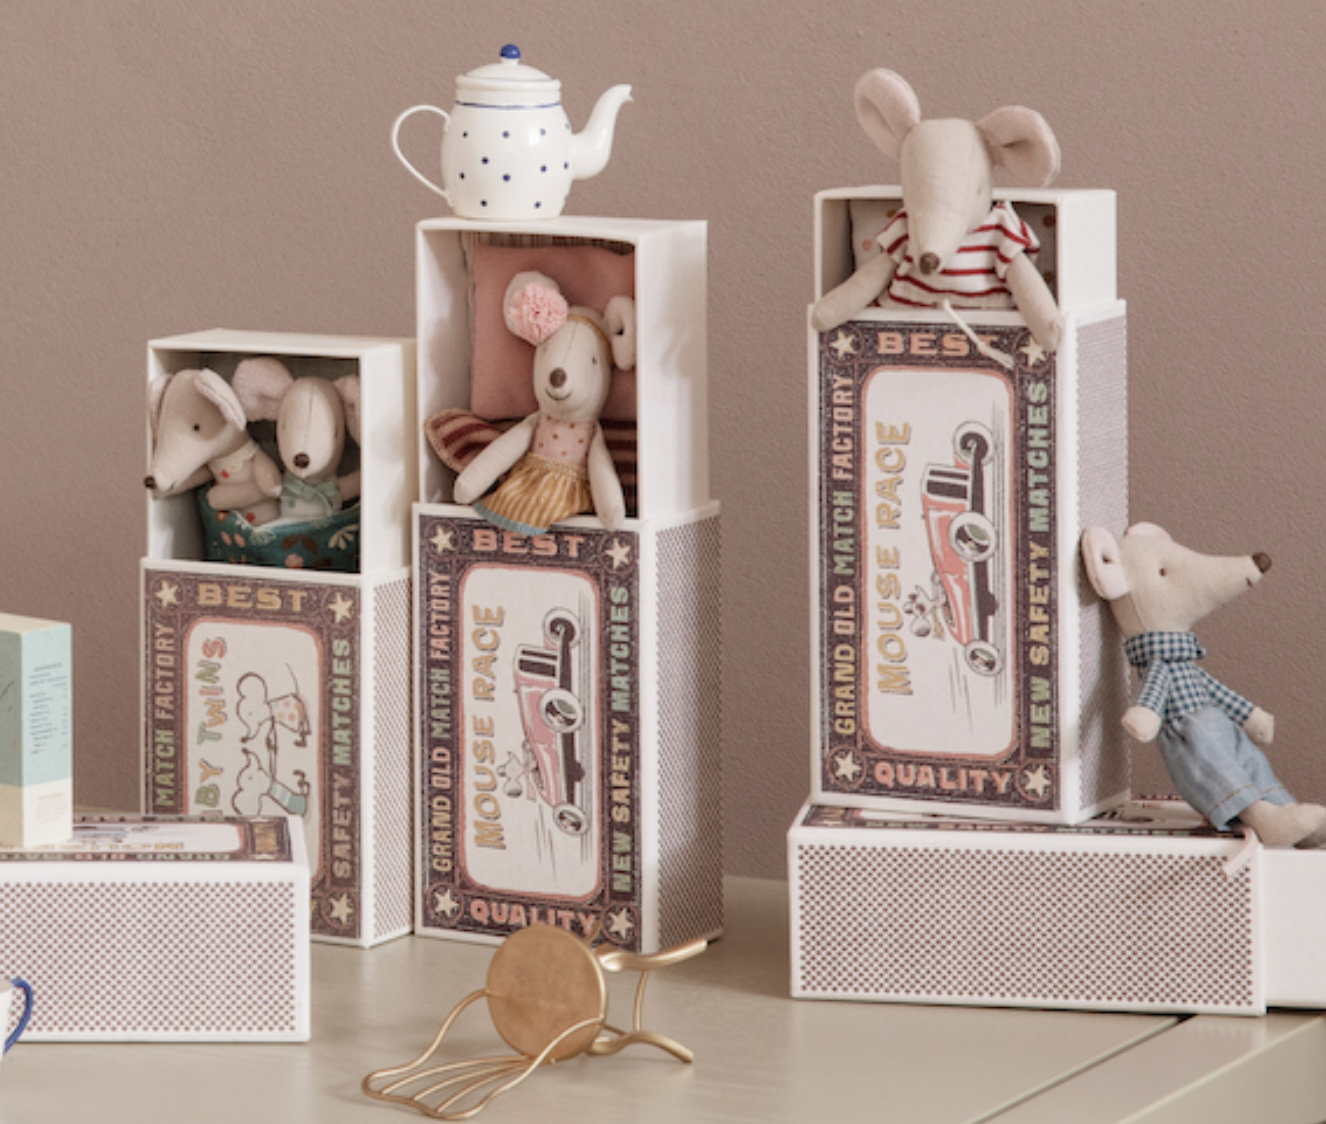 Maileg Mouse in Matchbox - Big Brother in Pajamas